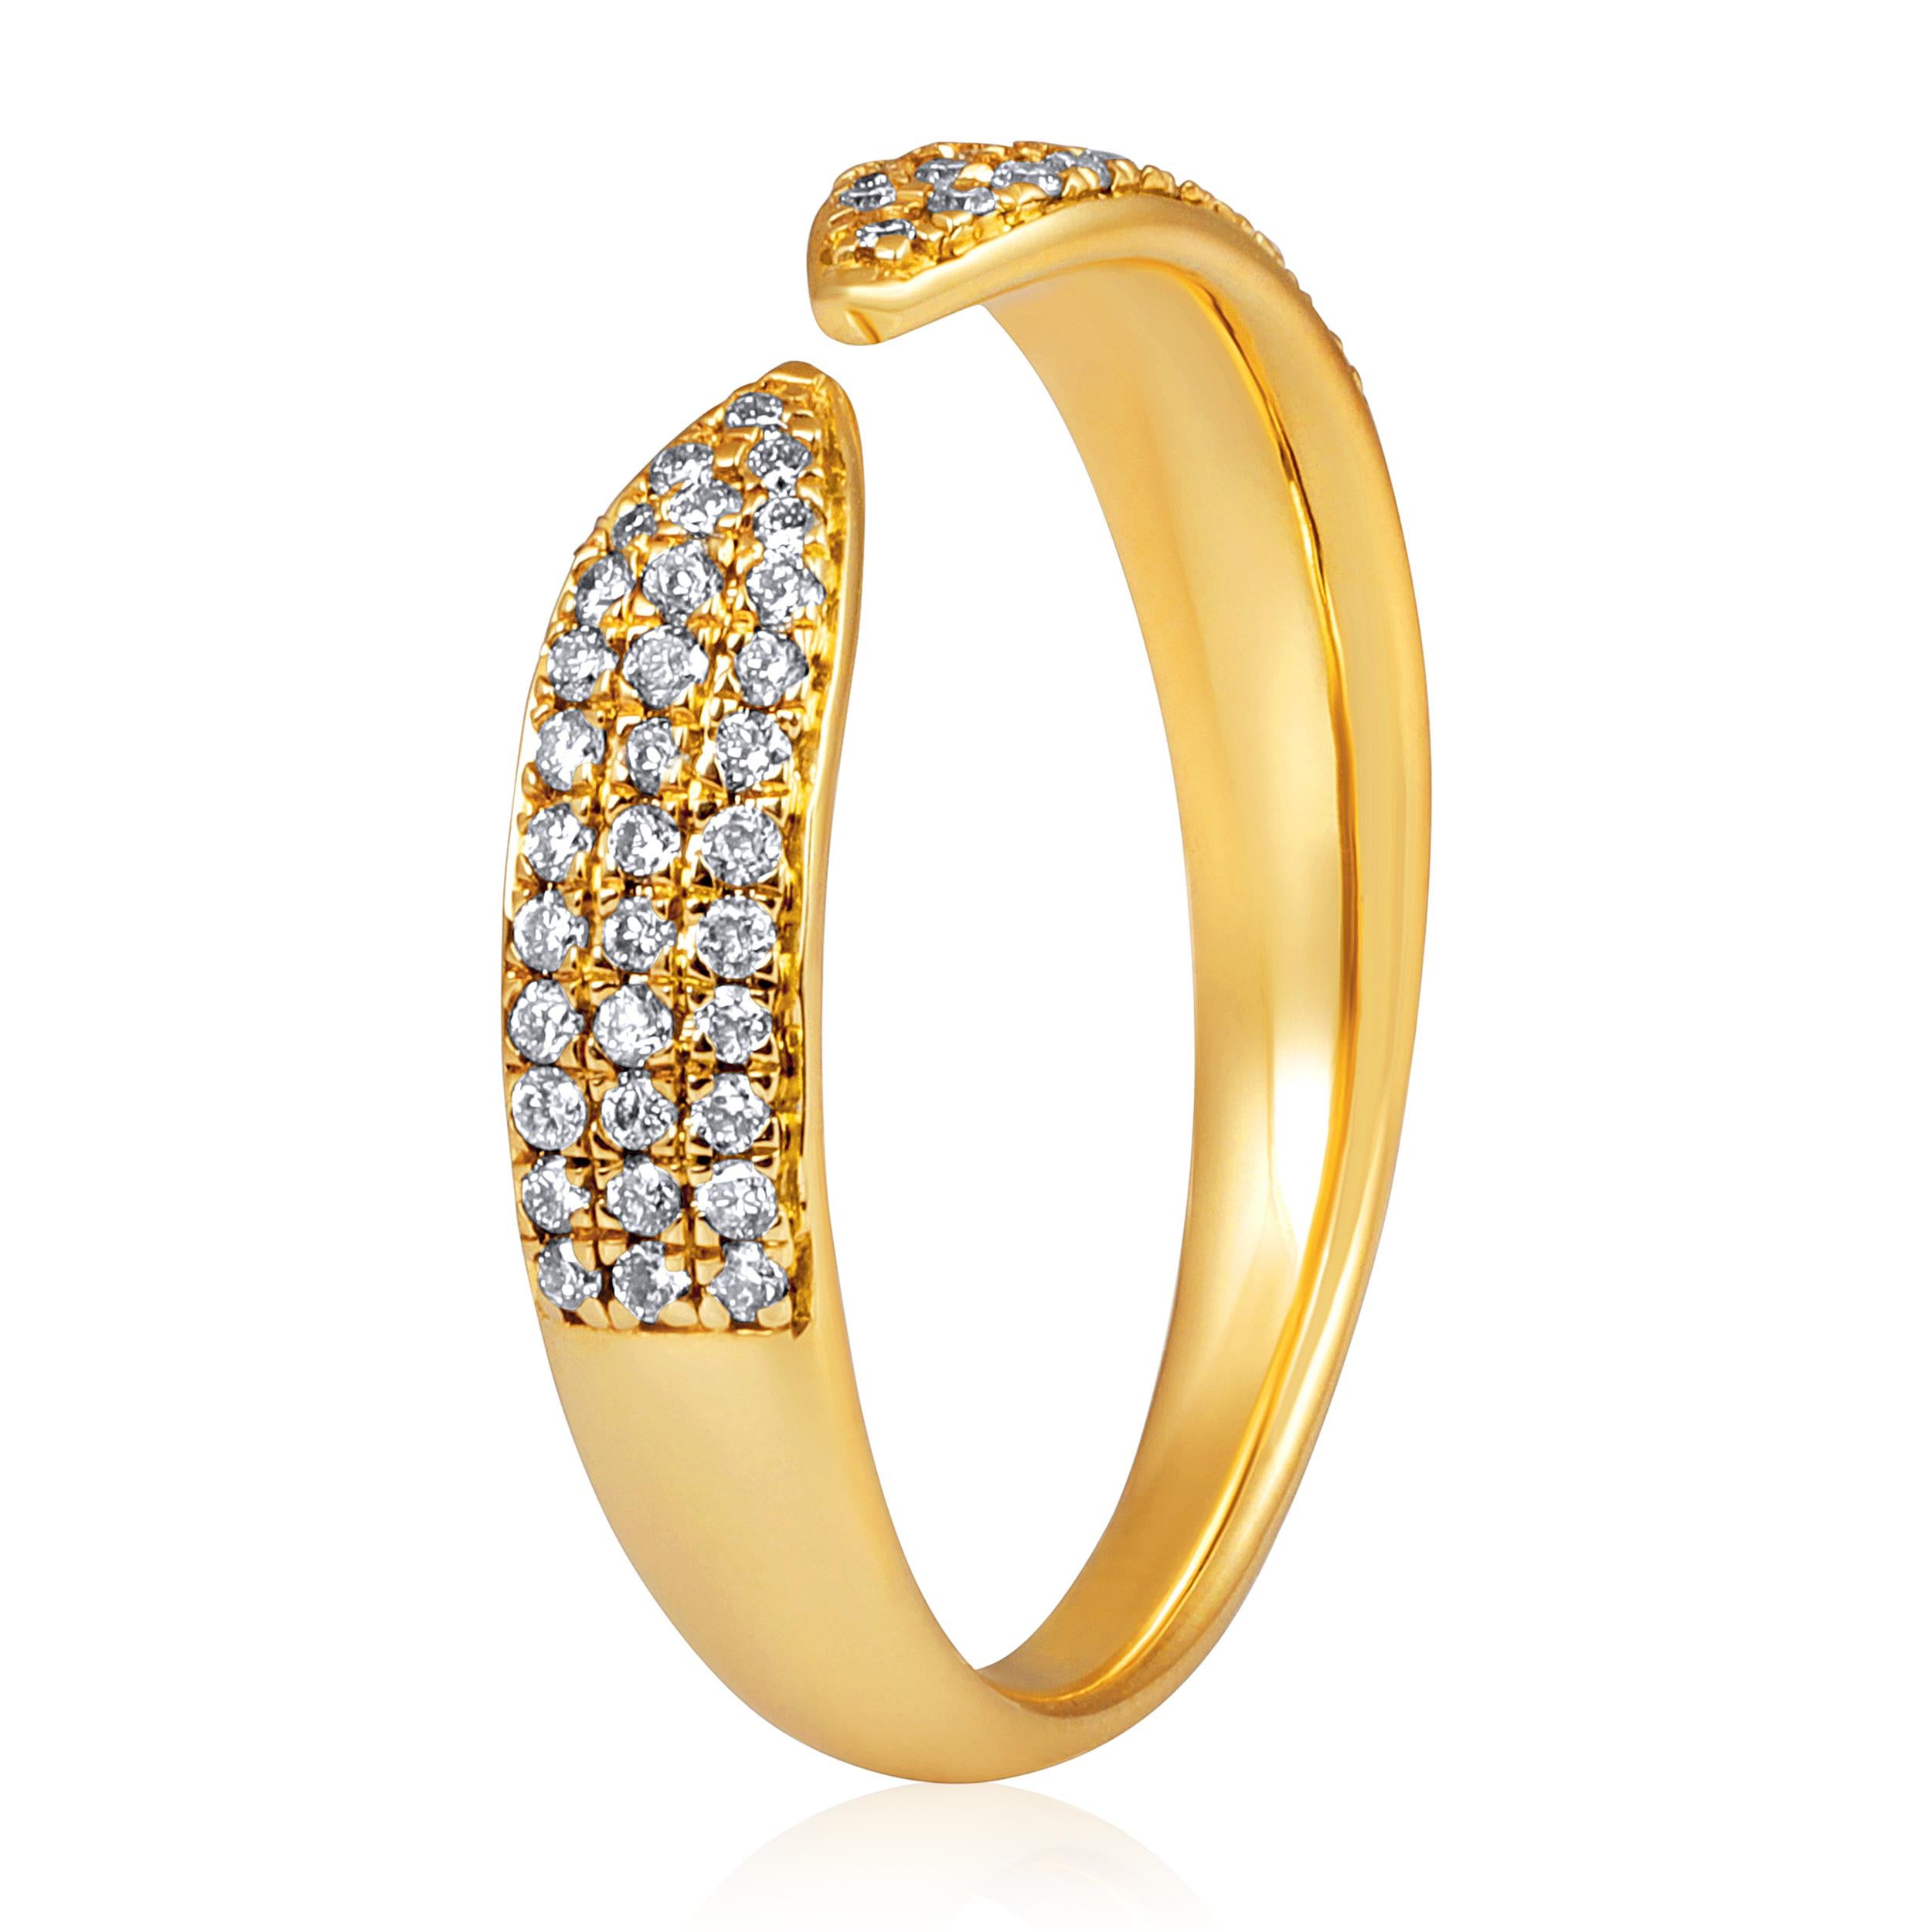 Crafted in 2.73 grams of 14K Yellow Gold, the ring contains 66 stones of Round Natural Diamonds with a total of 0.25 carat in E-F color and SI clarity.

CONTEMPORARY AND TIMELESS ESSENCE: Crafted in 14-karat/18-karat with 100% natural diamond and